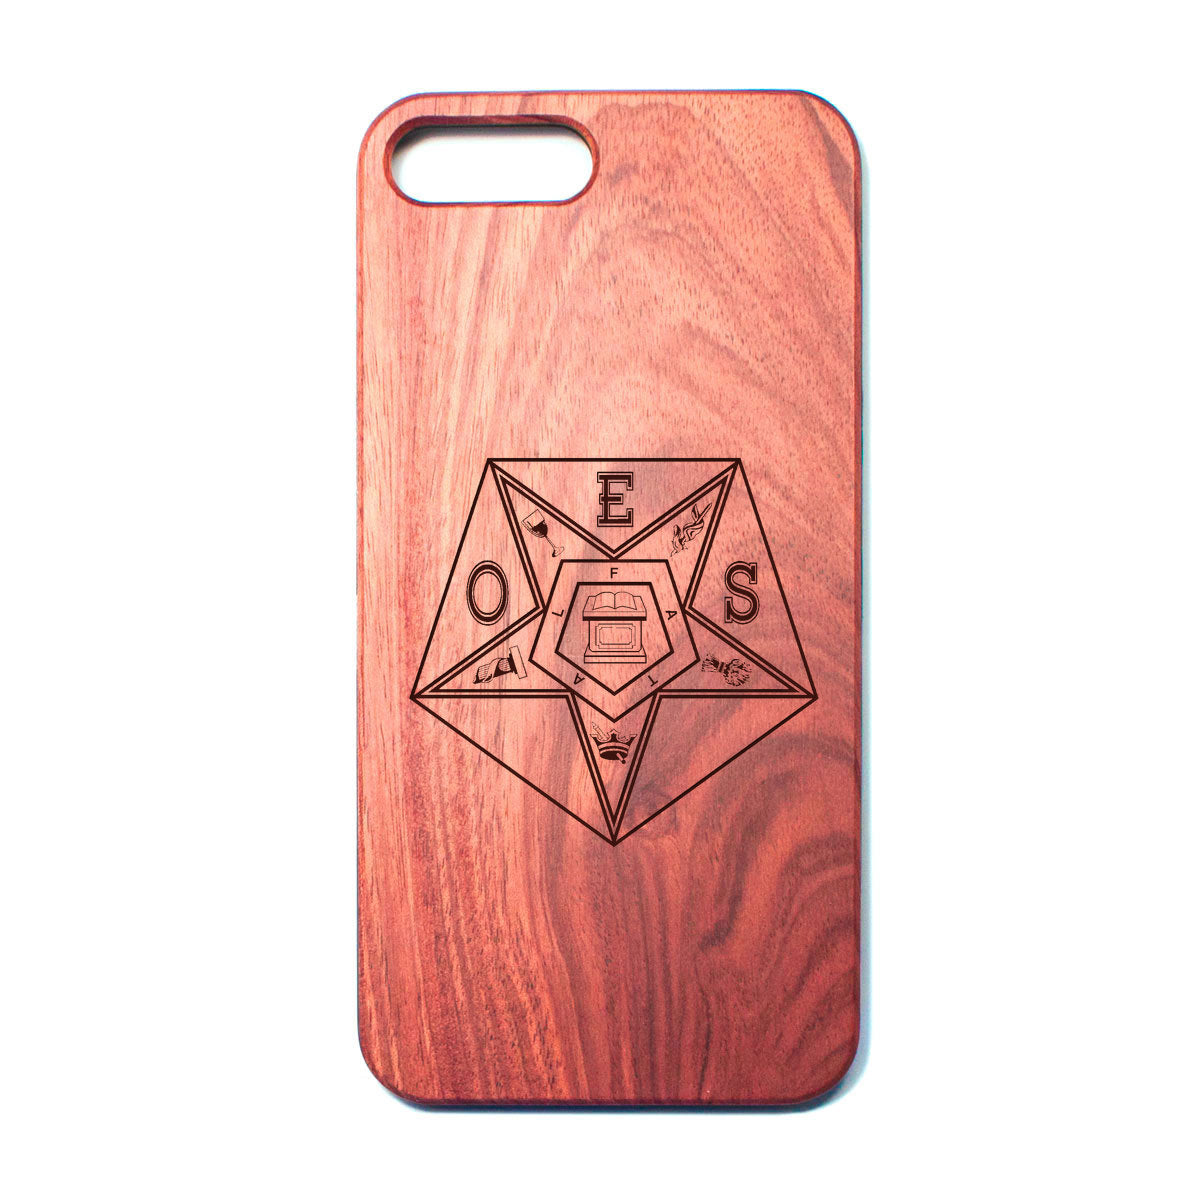 OES Rosewood iPhone Case - JaZazzy 